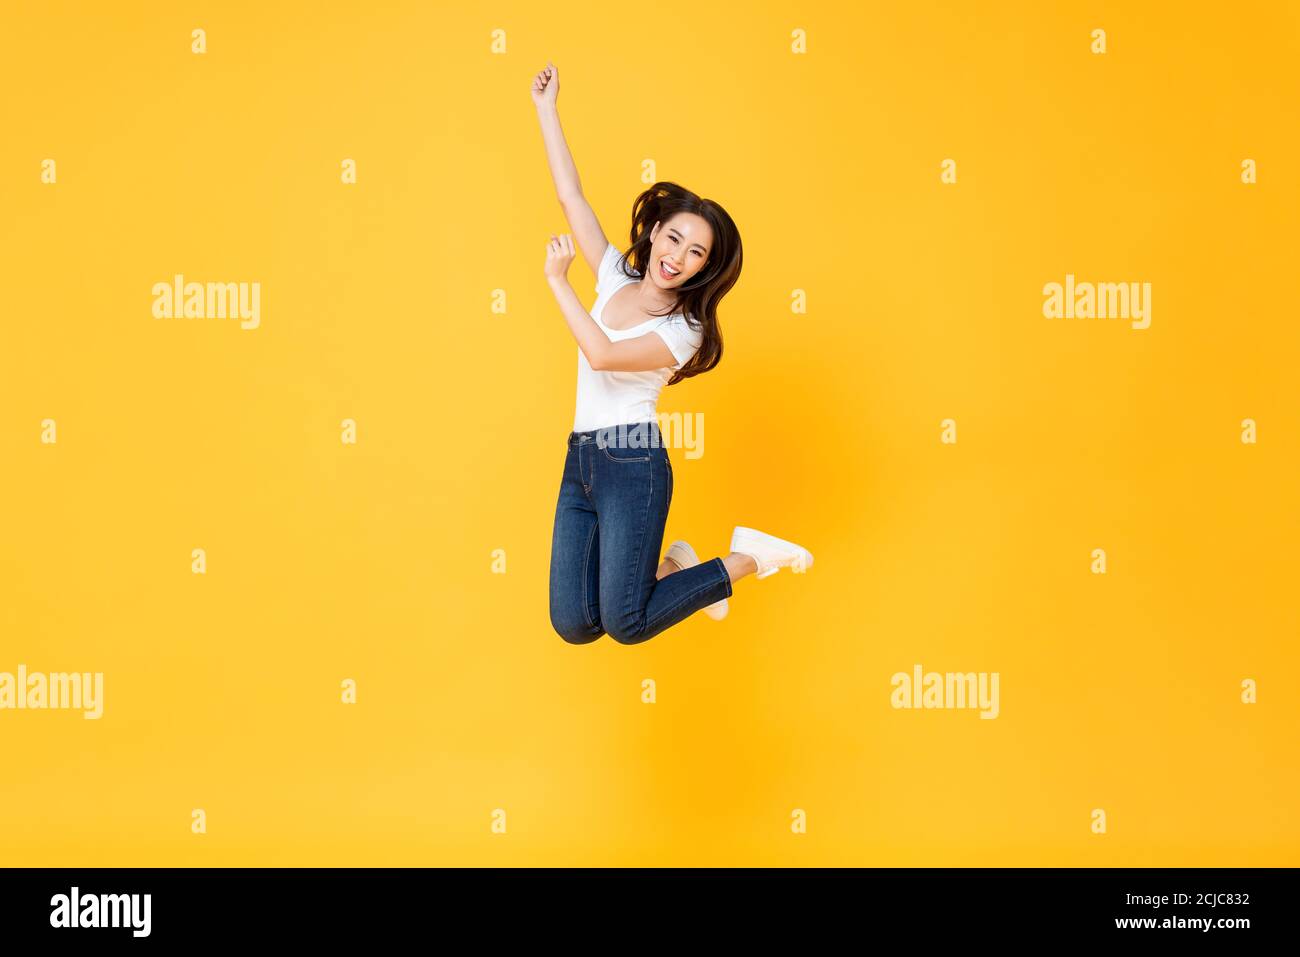 Full length portrait of pretty Asian woman smiling and jumping in mid-air isolated on yellow background Stock Photo